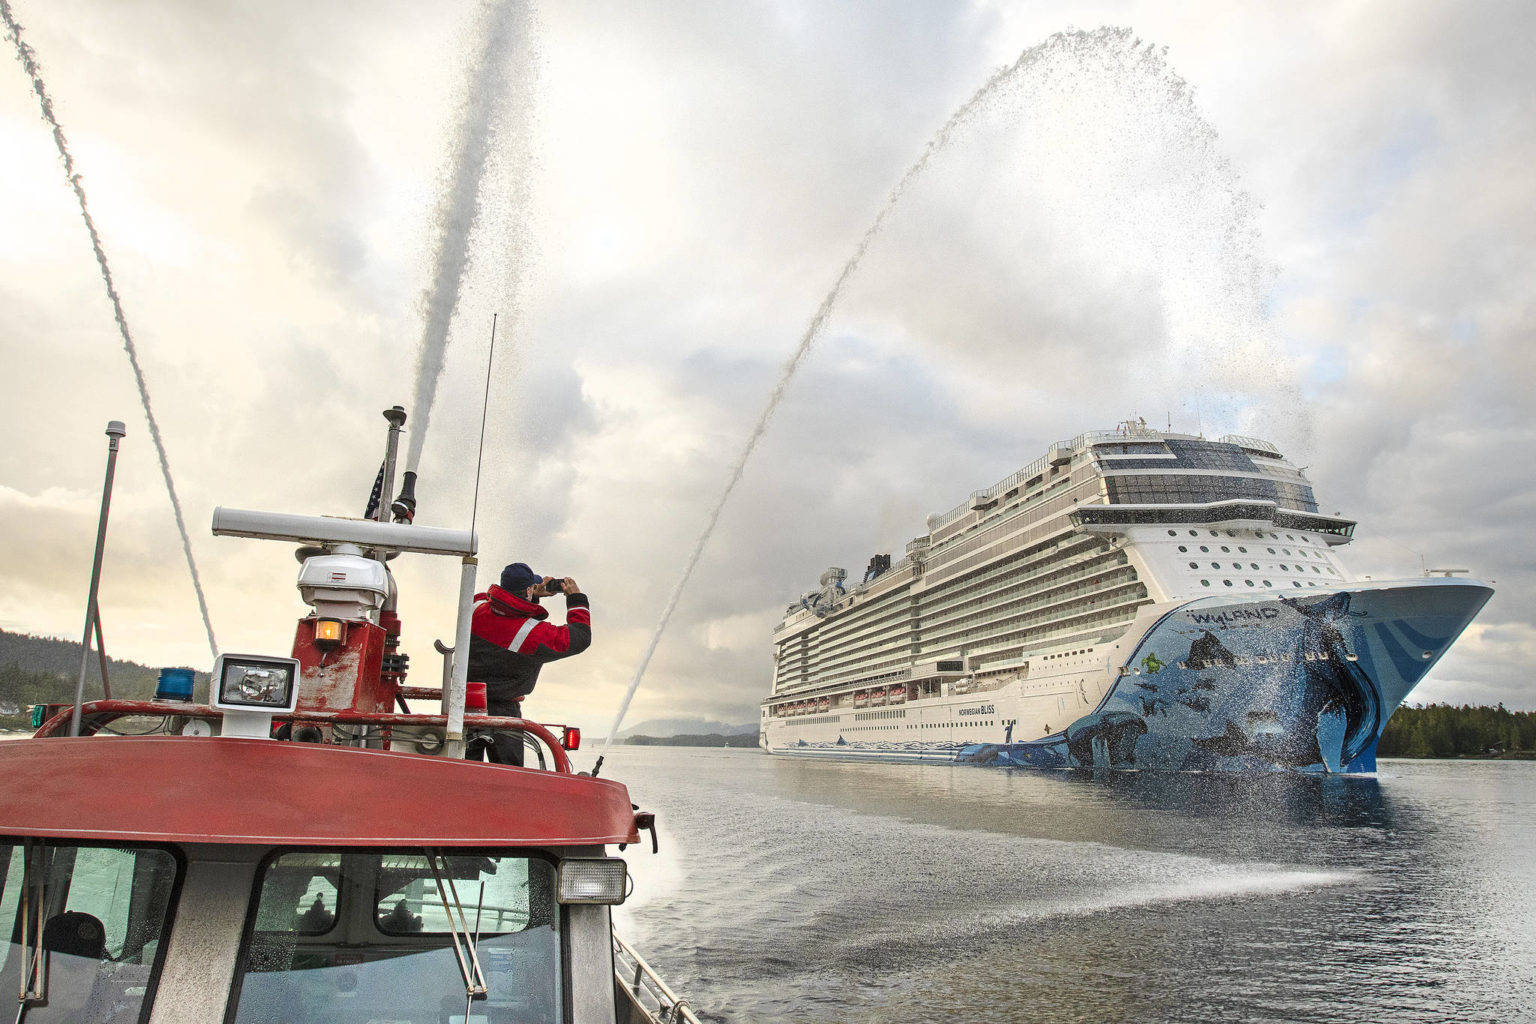 Firefighter medic Andy Tighe snaps a photo of the breakaway plus-class cruise ship Norwegian Bliss while Captain Tracy Mettler operates a fireboat in the Tongass Narrows in Ketchikan, Alaska, on June 4, 2018. President Joe Biden signed into law Monday, May 24, 2021, legislation that opens a door for resumed cruise ship travel to Alaska after the pandemic last year scrapped sailings. (Dustin Safranek / Ketchikan Daily News)